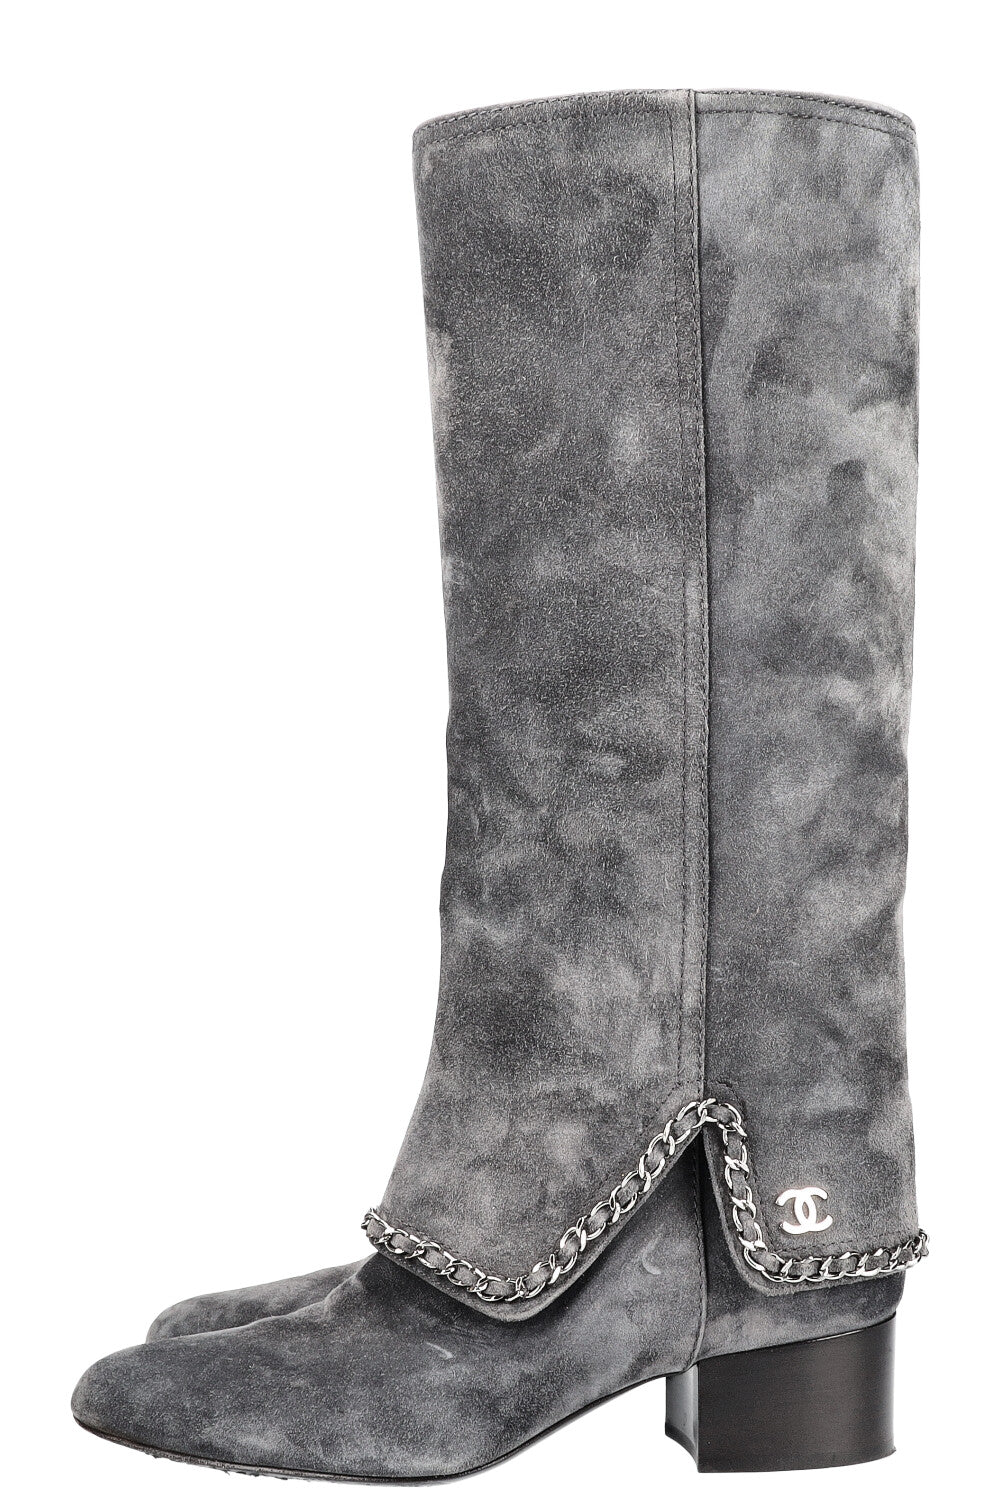 CHANEL Boots with Chain Suede Grey